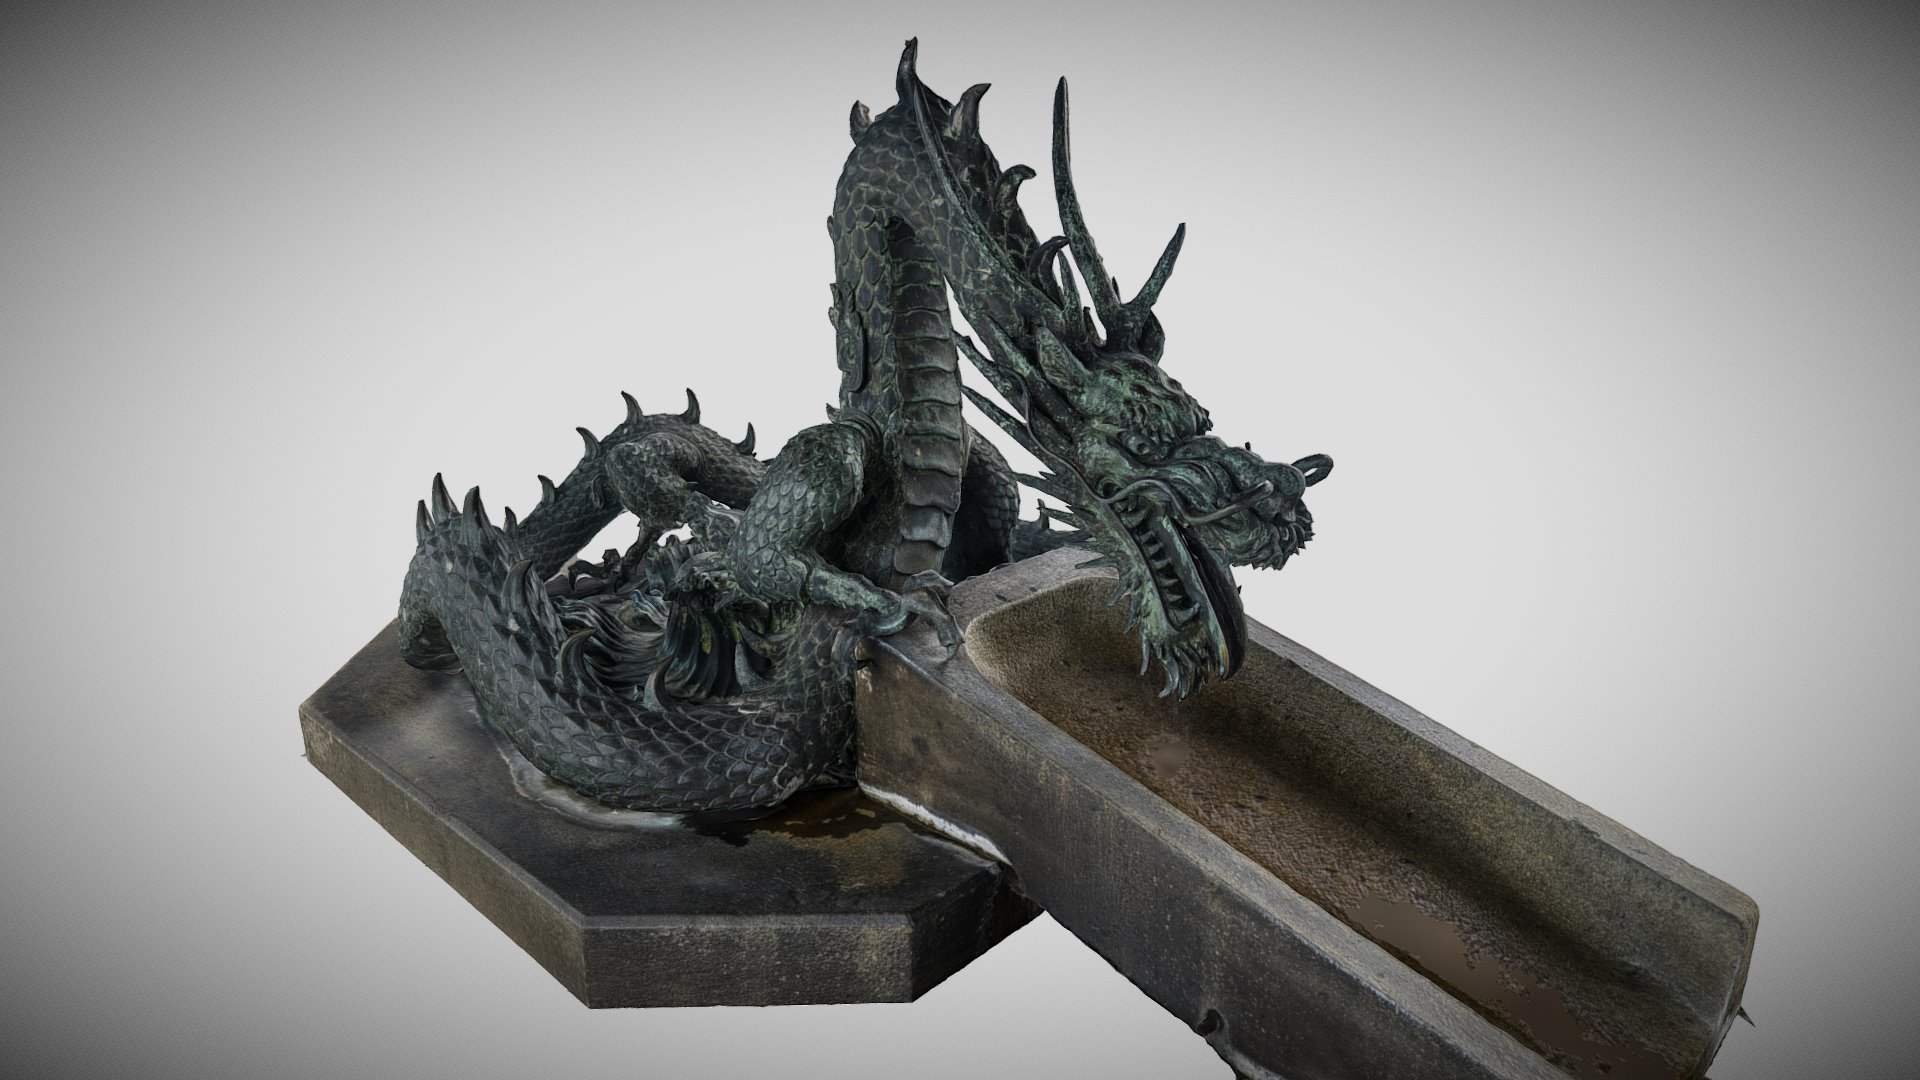 3D model Japanese dragon fountain photogrammetry scan - This is a 3D model of the Japanese dragon fountain photogrammetry scan. The 3D model is about a statue of a person riding a horse.